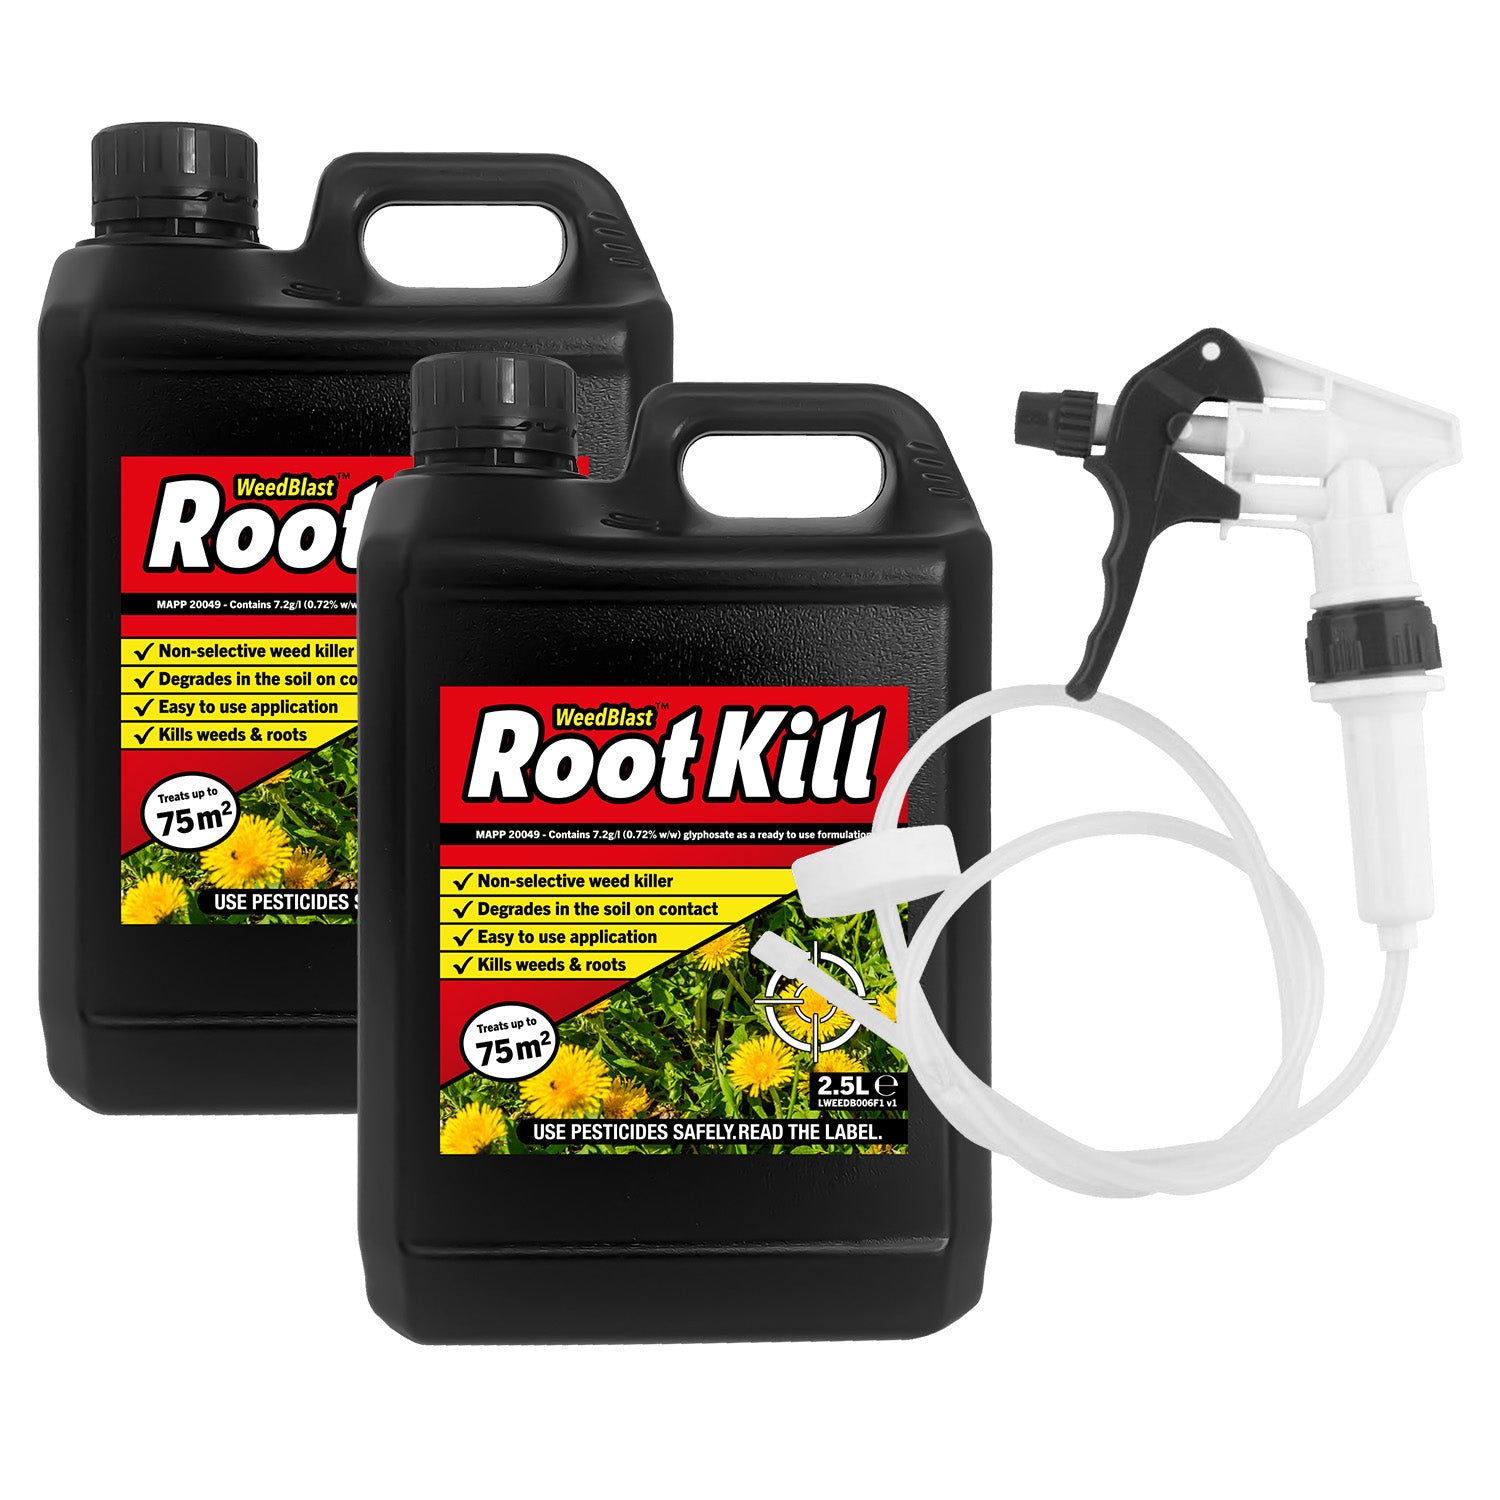 Weedblast RootKill Glyphosate Weedkiller 2 x 2.5 Litre, Ready to use with Long Hose Trigger